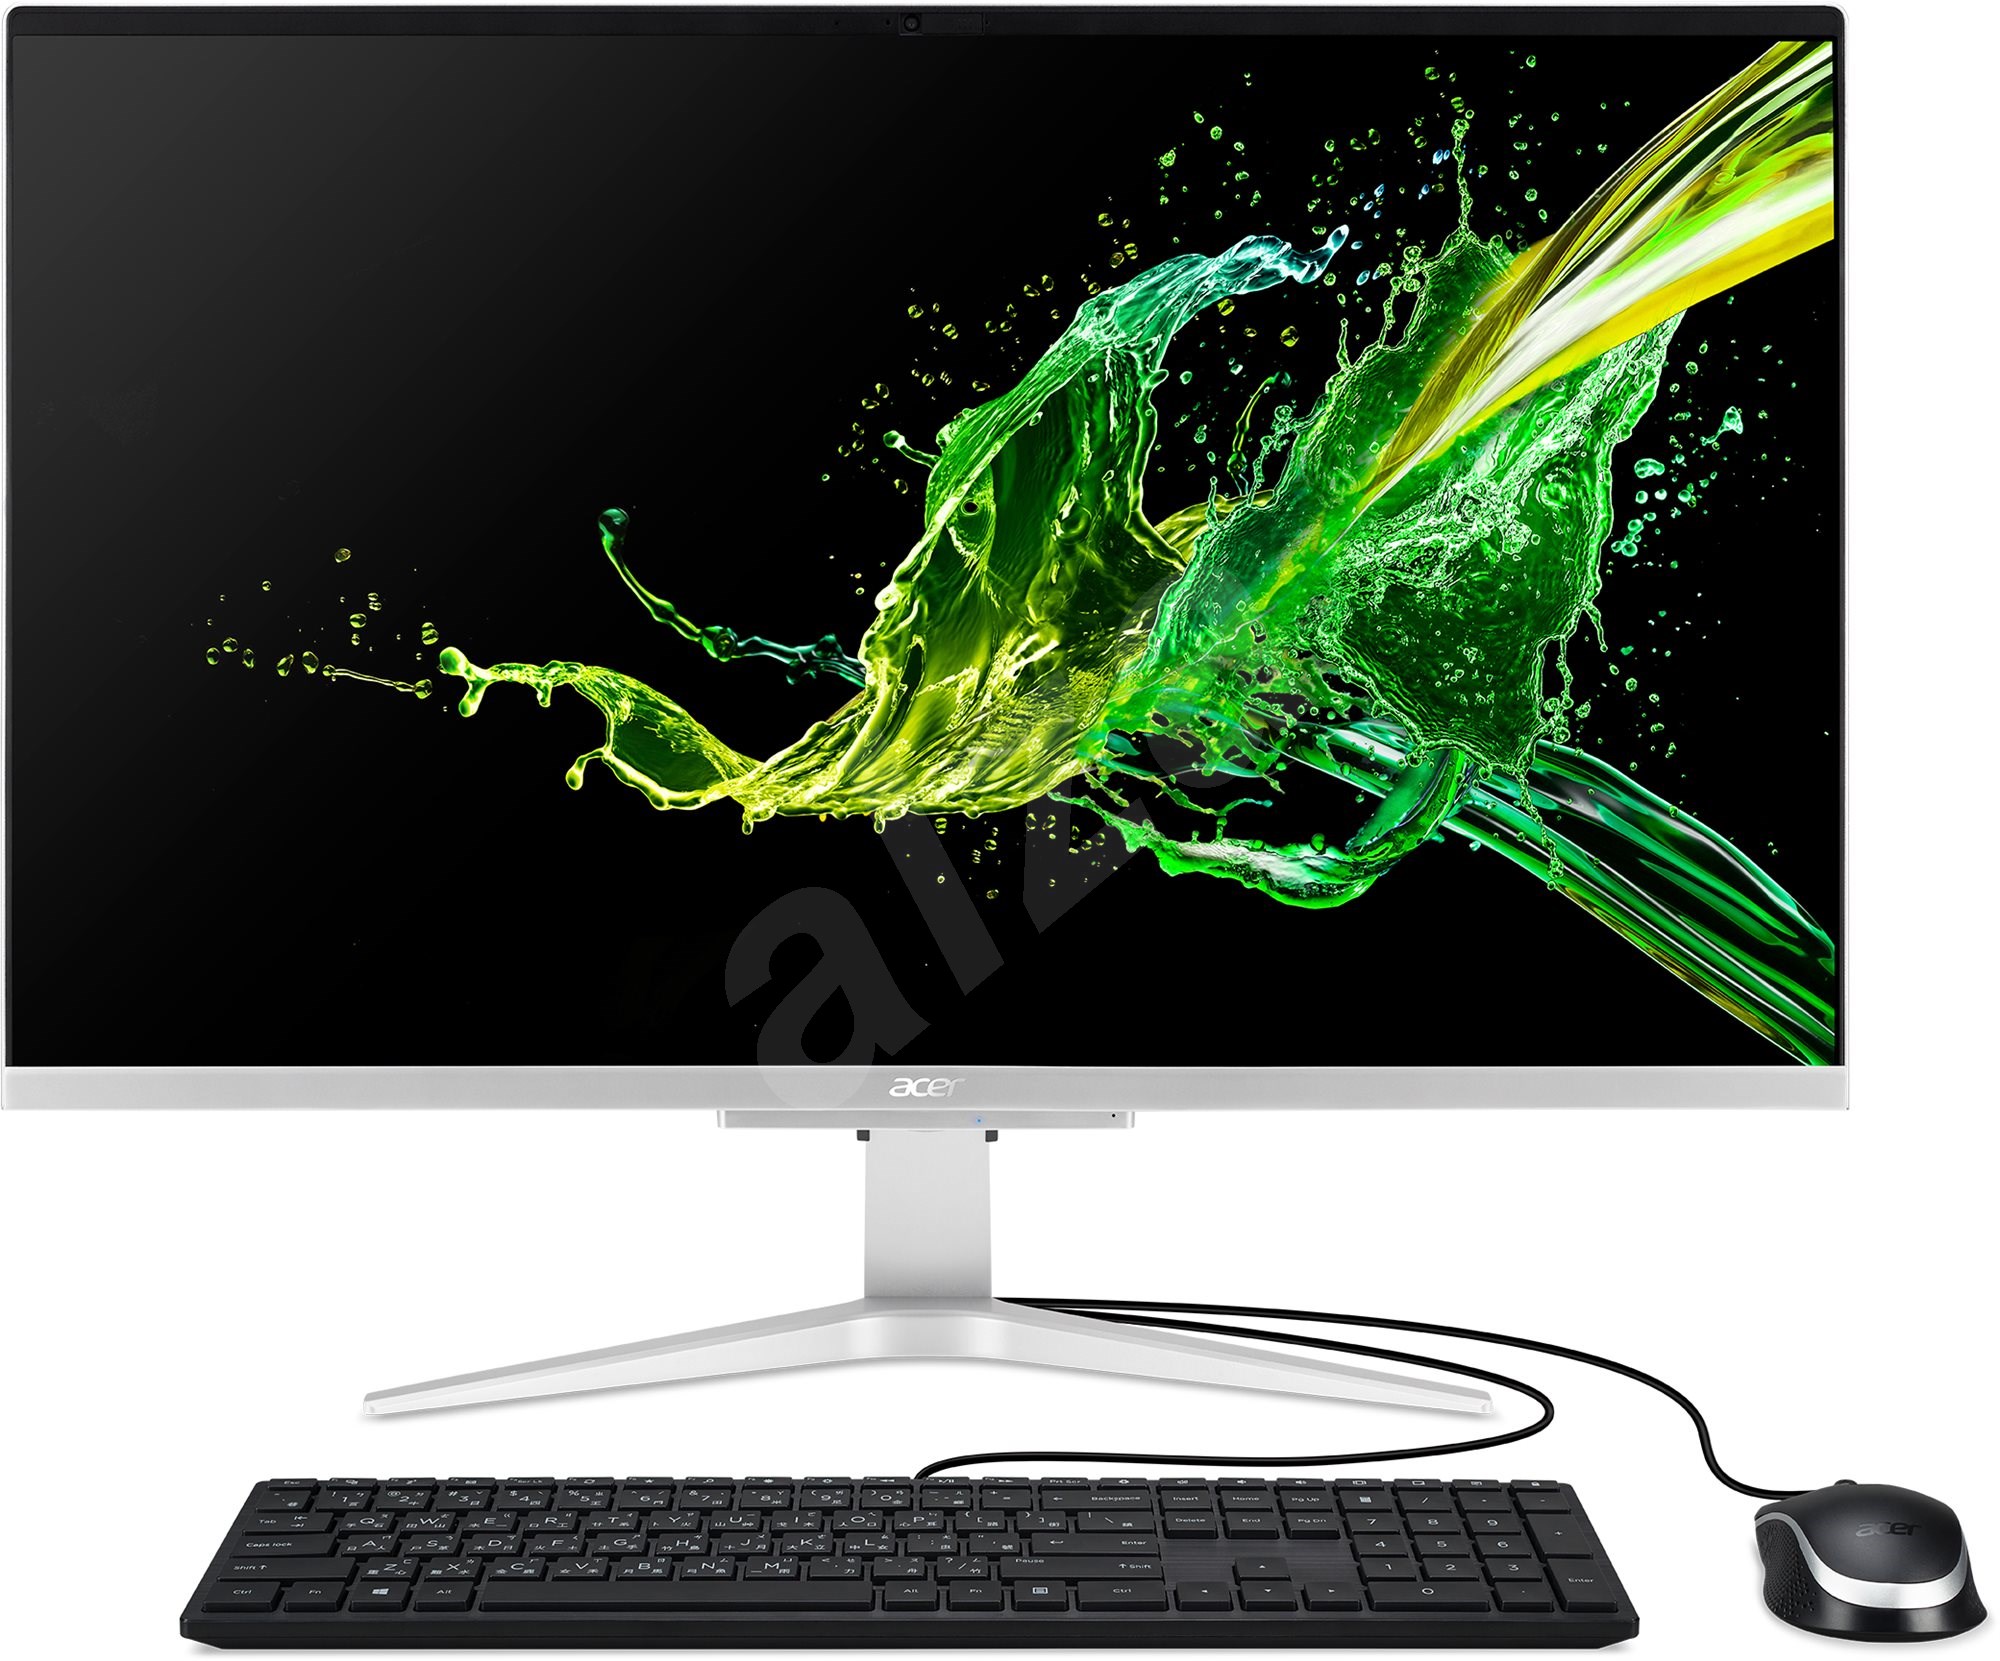 Příklad all in one PC - All In One PC Acer Aspire C27-962 1/6